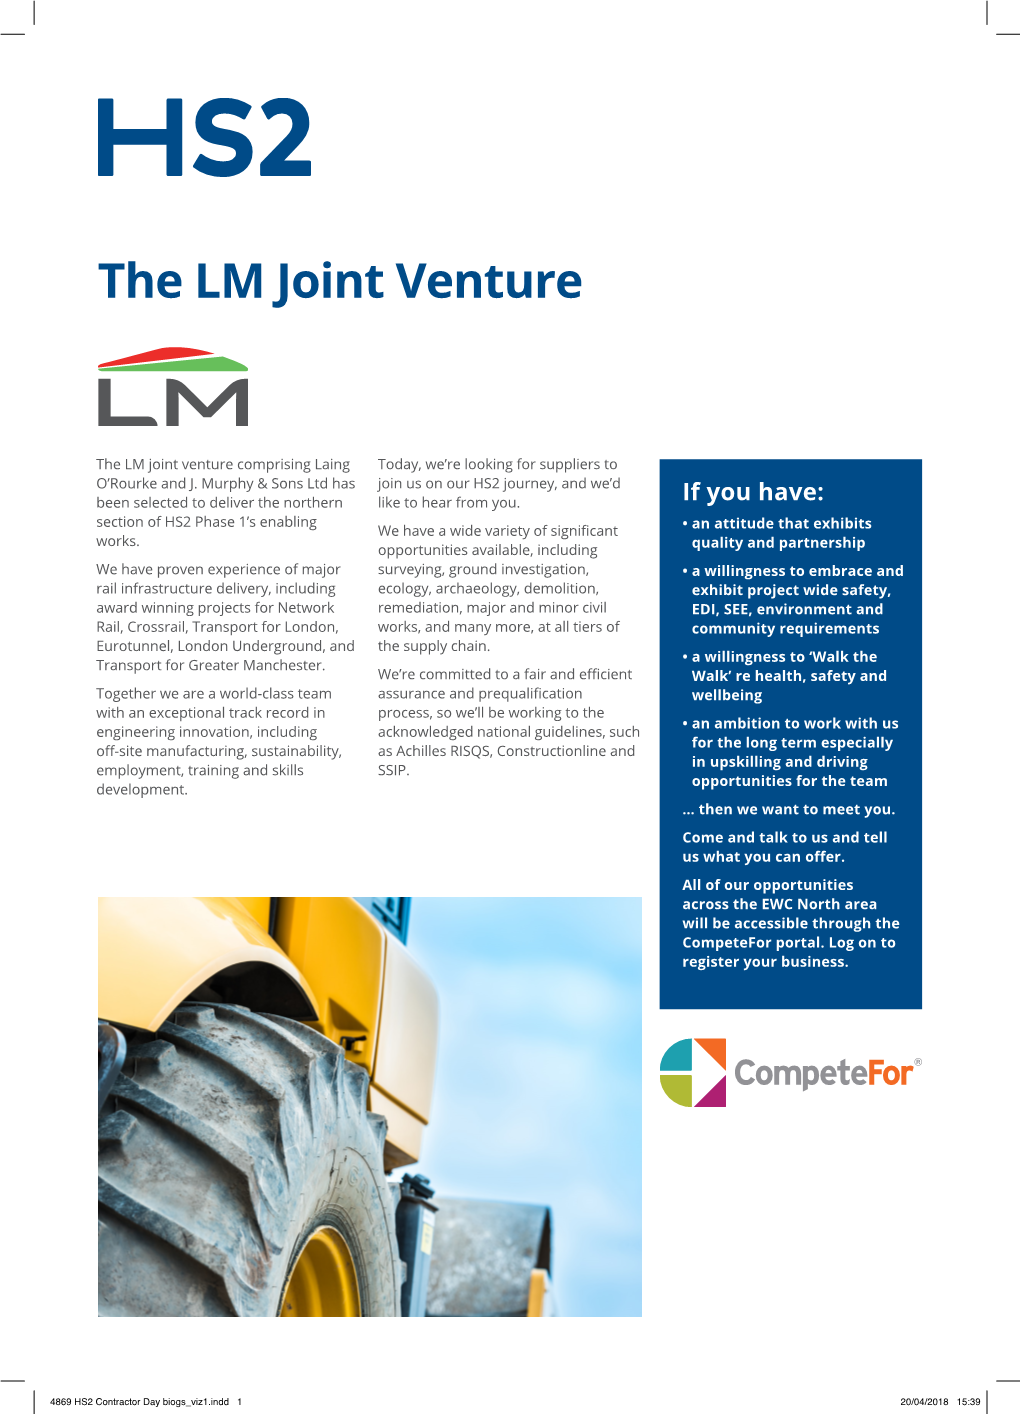 The LM Joint Venture